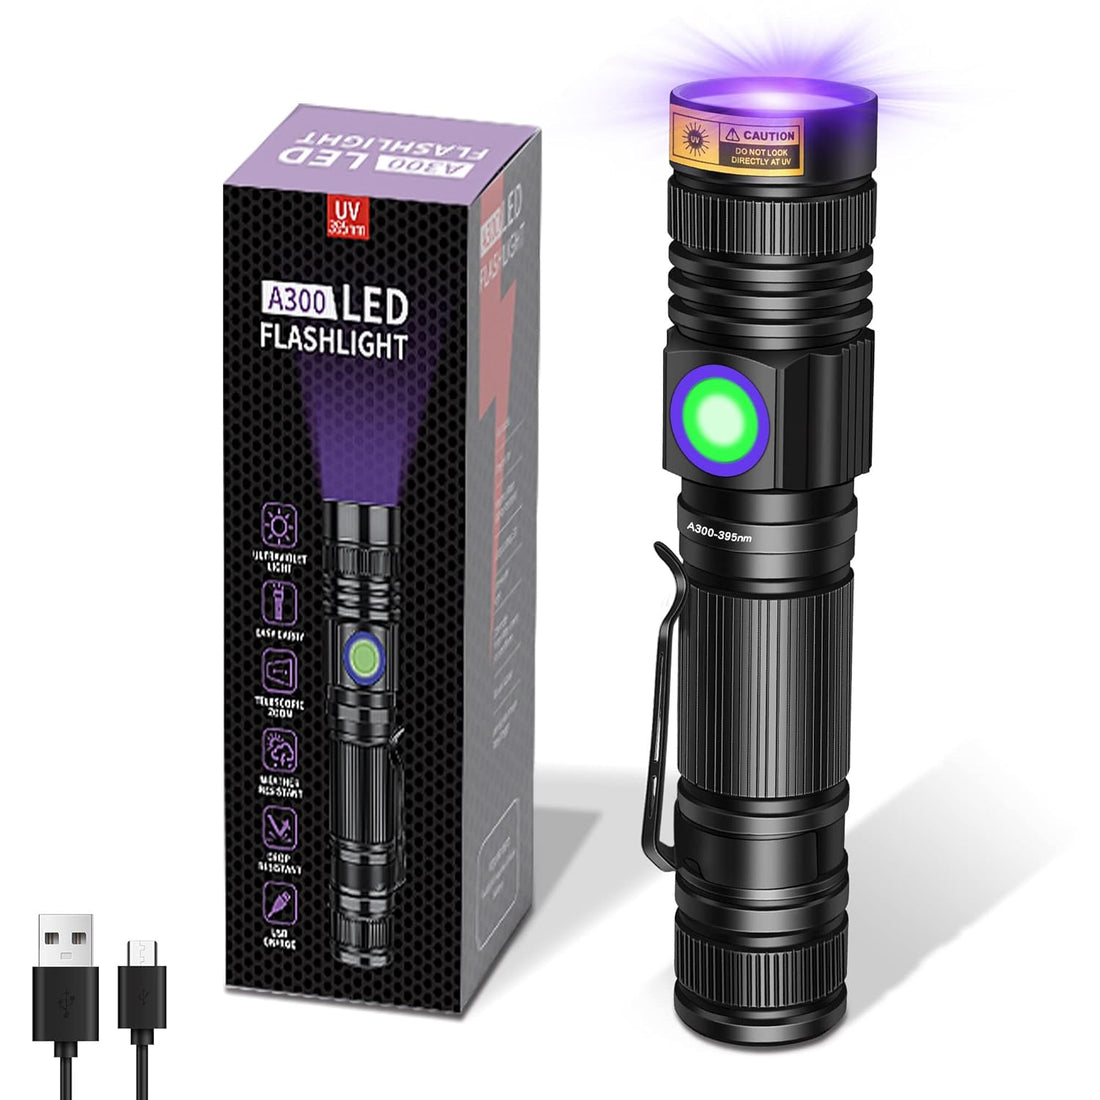 DARKBEAM UV 395nm Black Light Flashlight USB Rechargeable Woods lamp, Mini Handheld Ultraviolet Blacklight LED Portable with Clip - Curing Resin, Detector for Pet Dog Urine, Scorpions, Stains, Amber